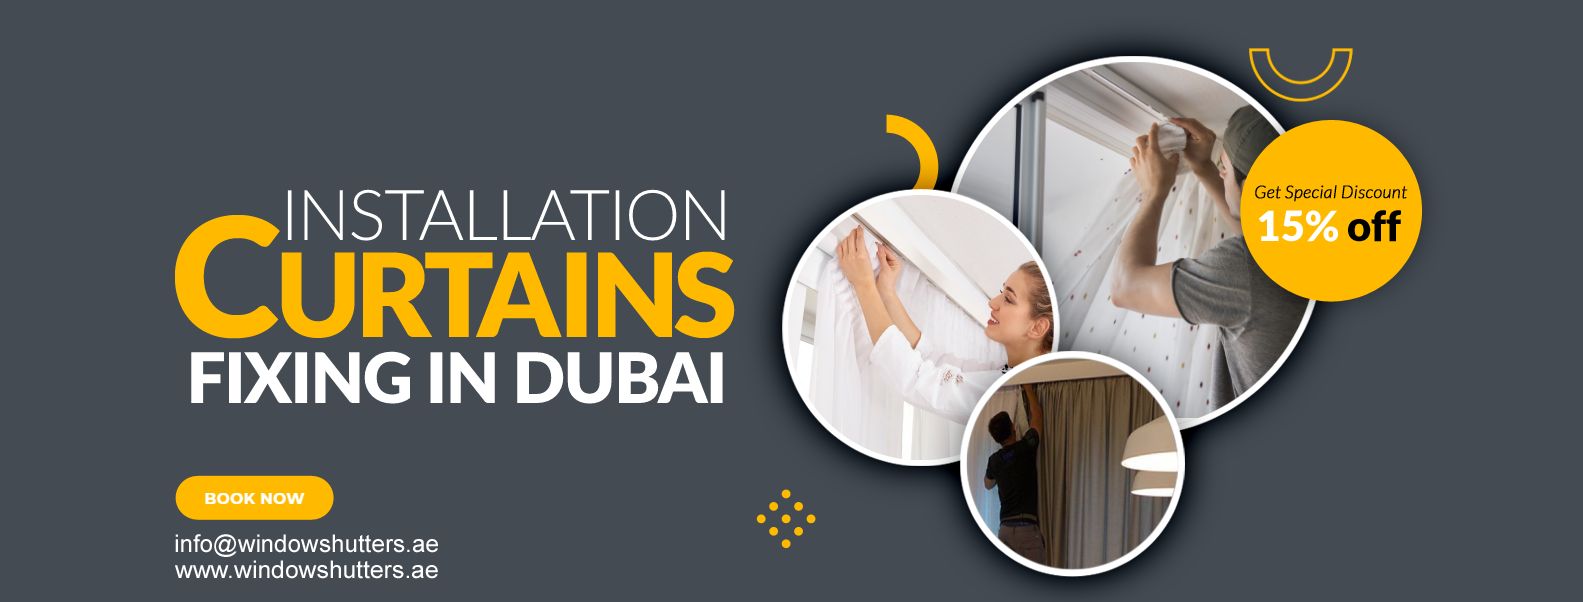 curtains installation and fixing Dubai